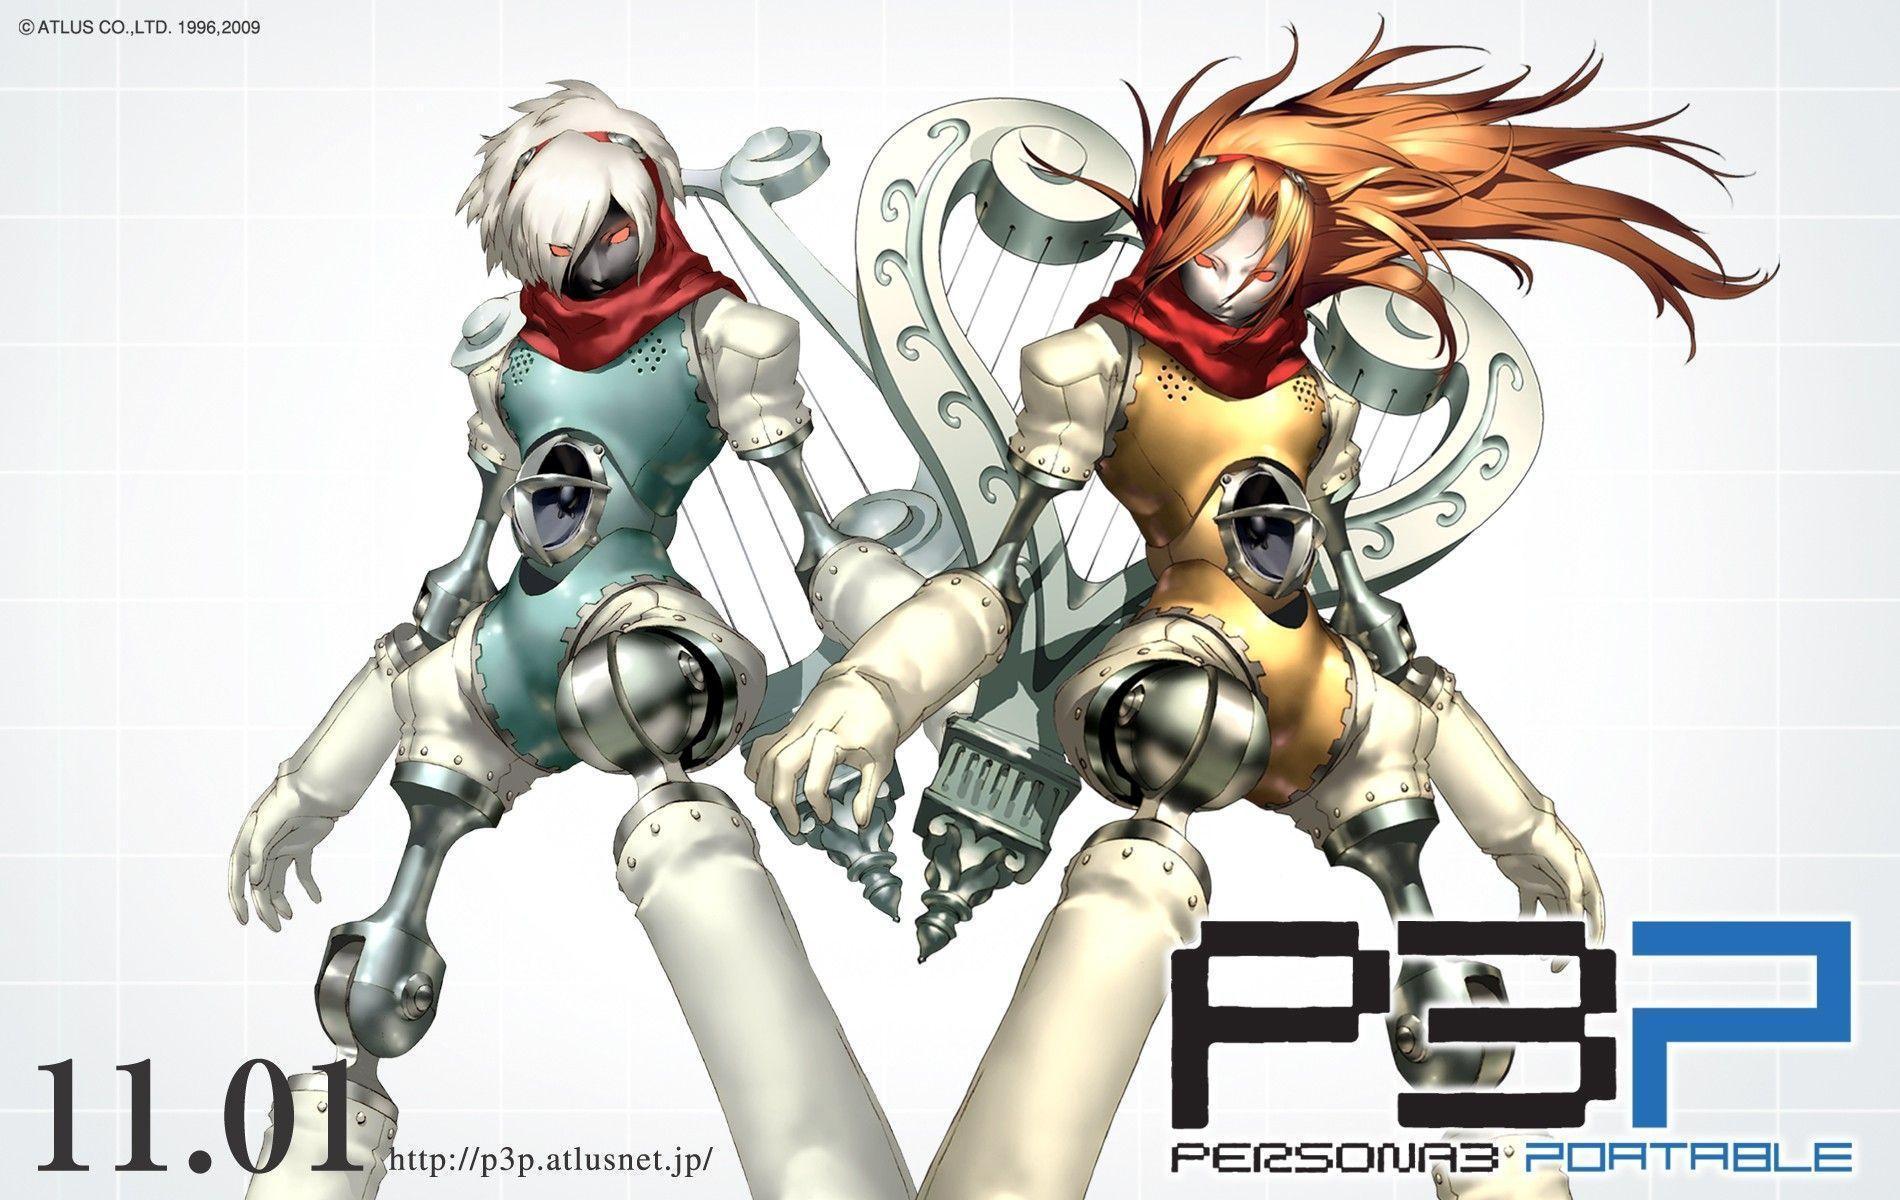 image For > Persona 3 Portable Female Protagonist Wallpaper